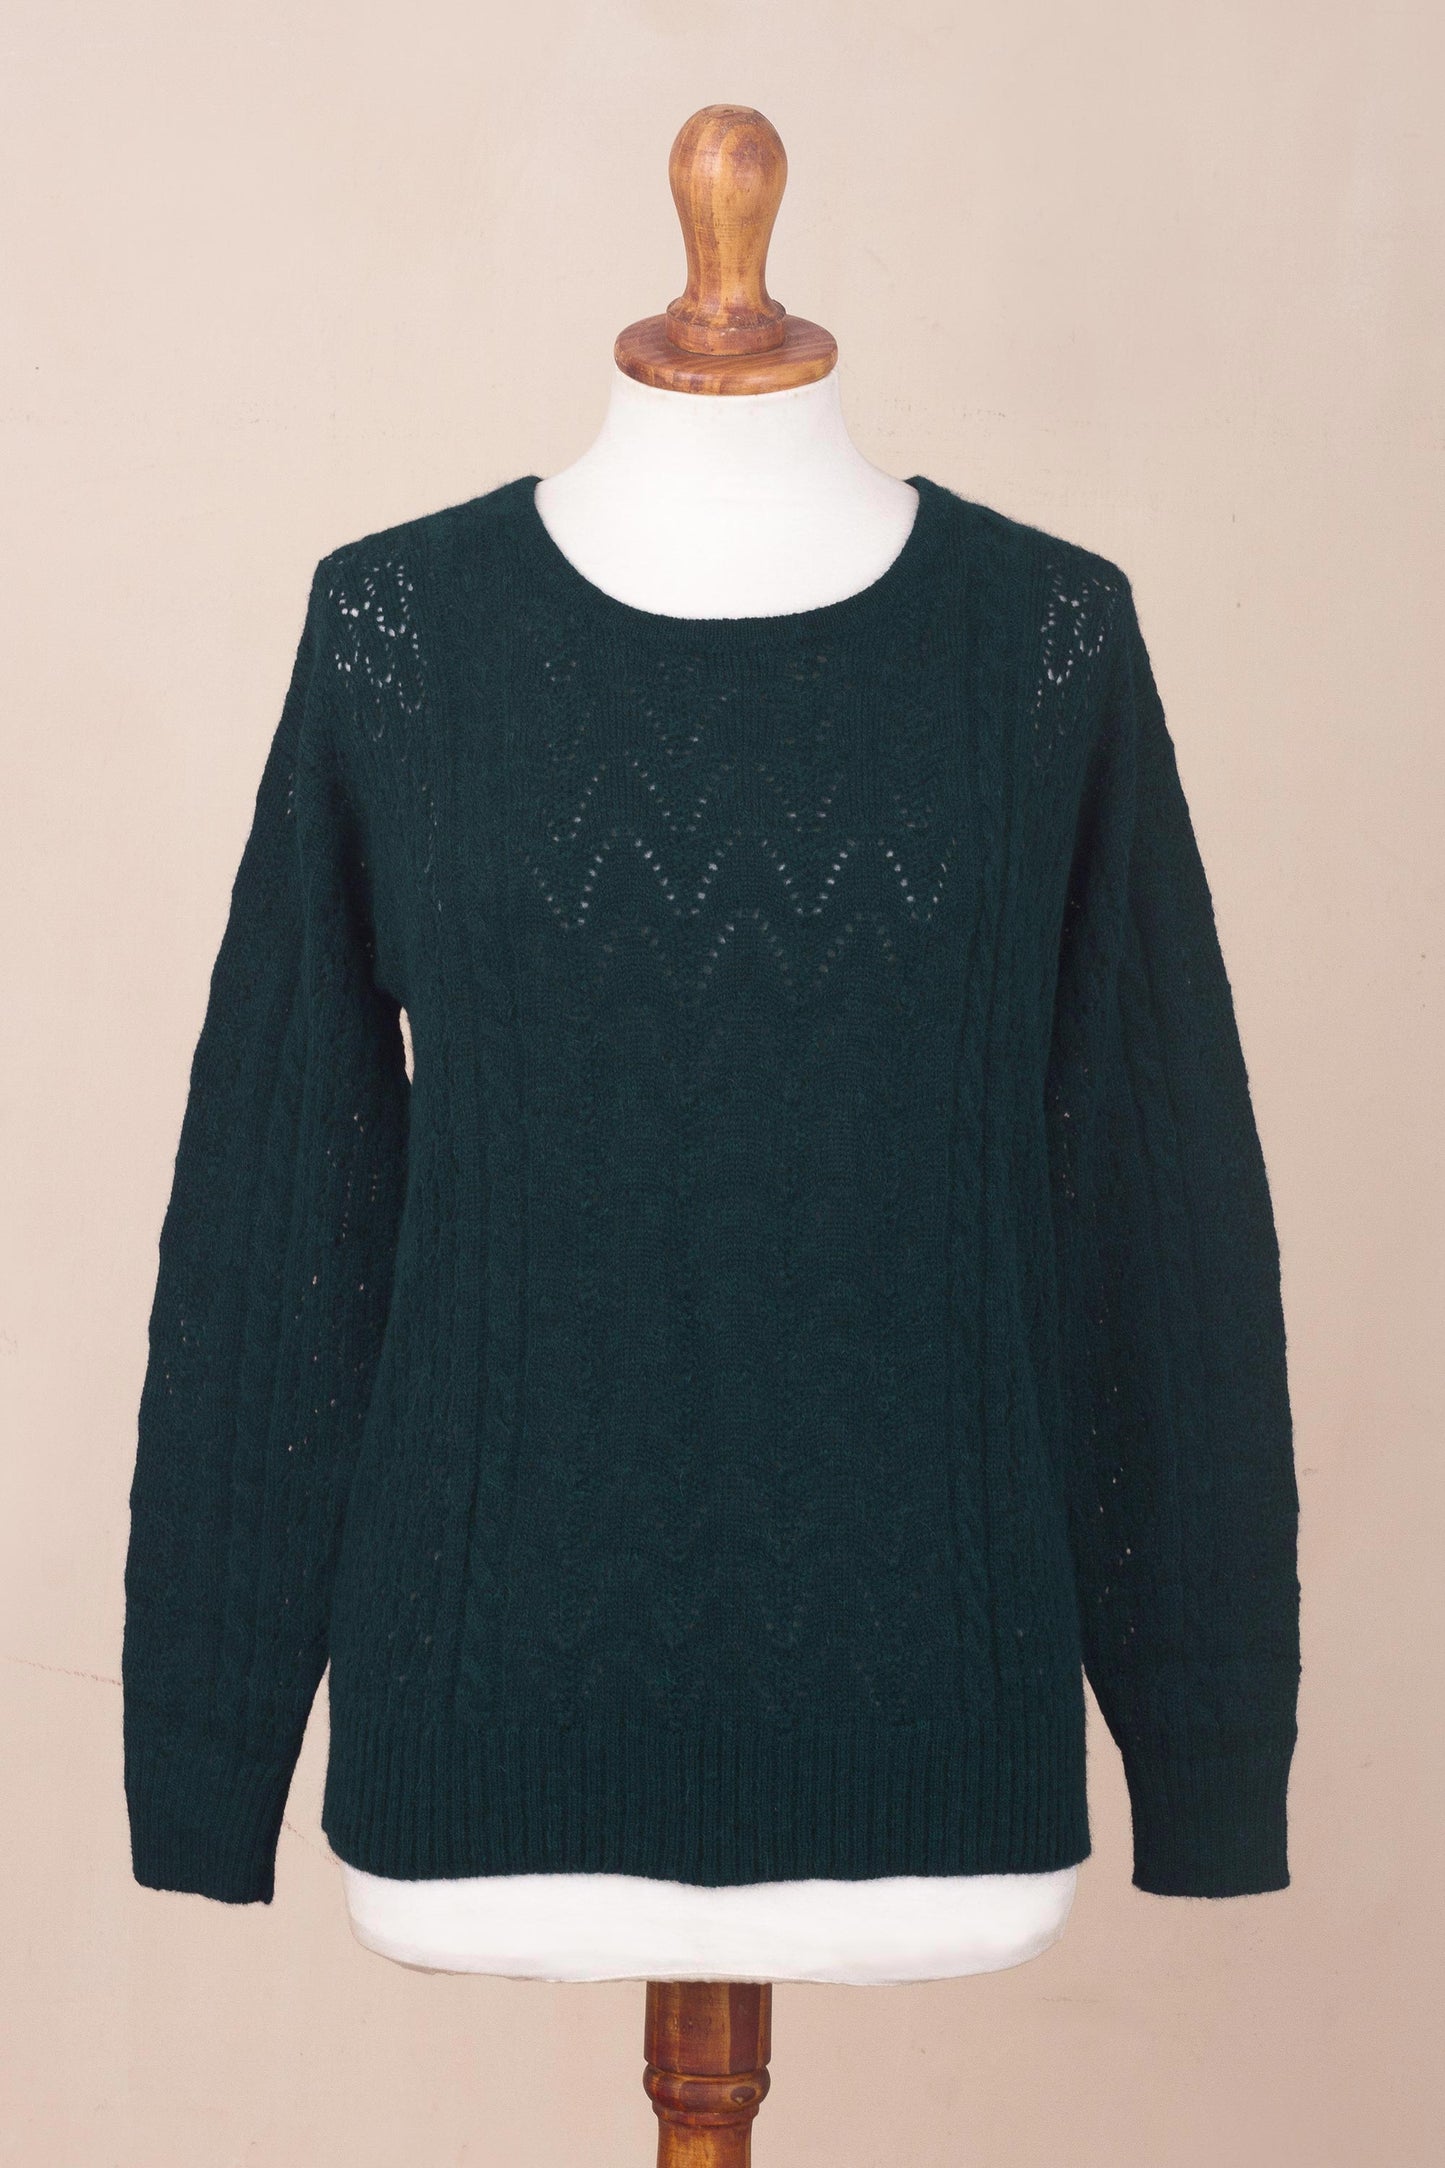 Teal Charm Forest Spruce Teal Baby Alpaca Pullover Sweater